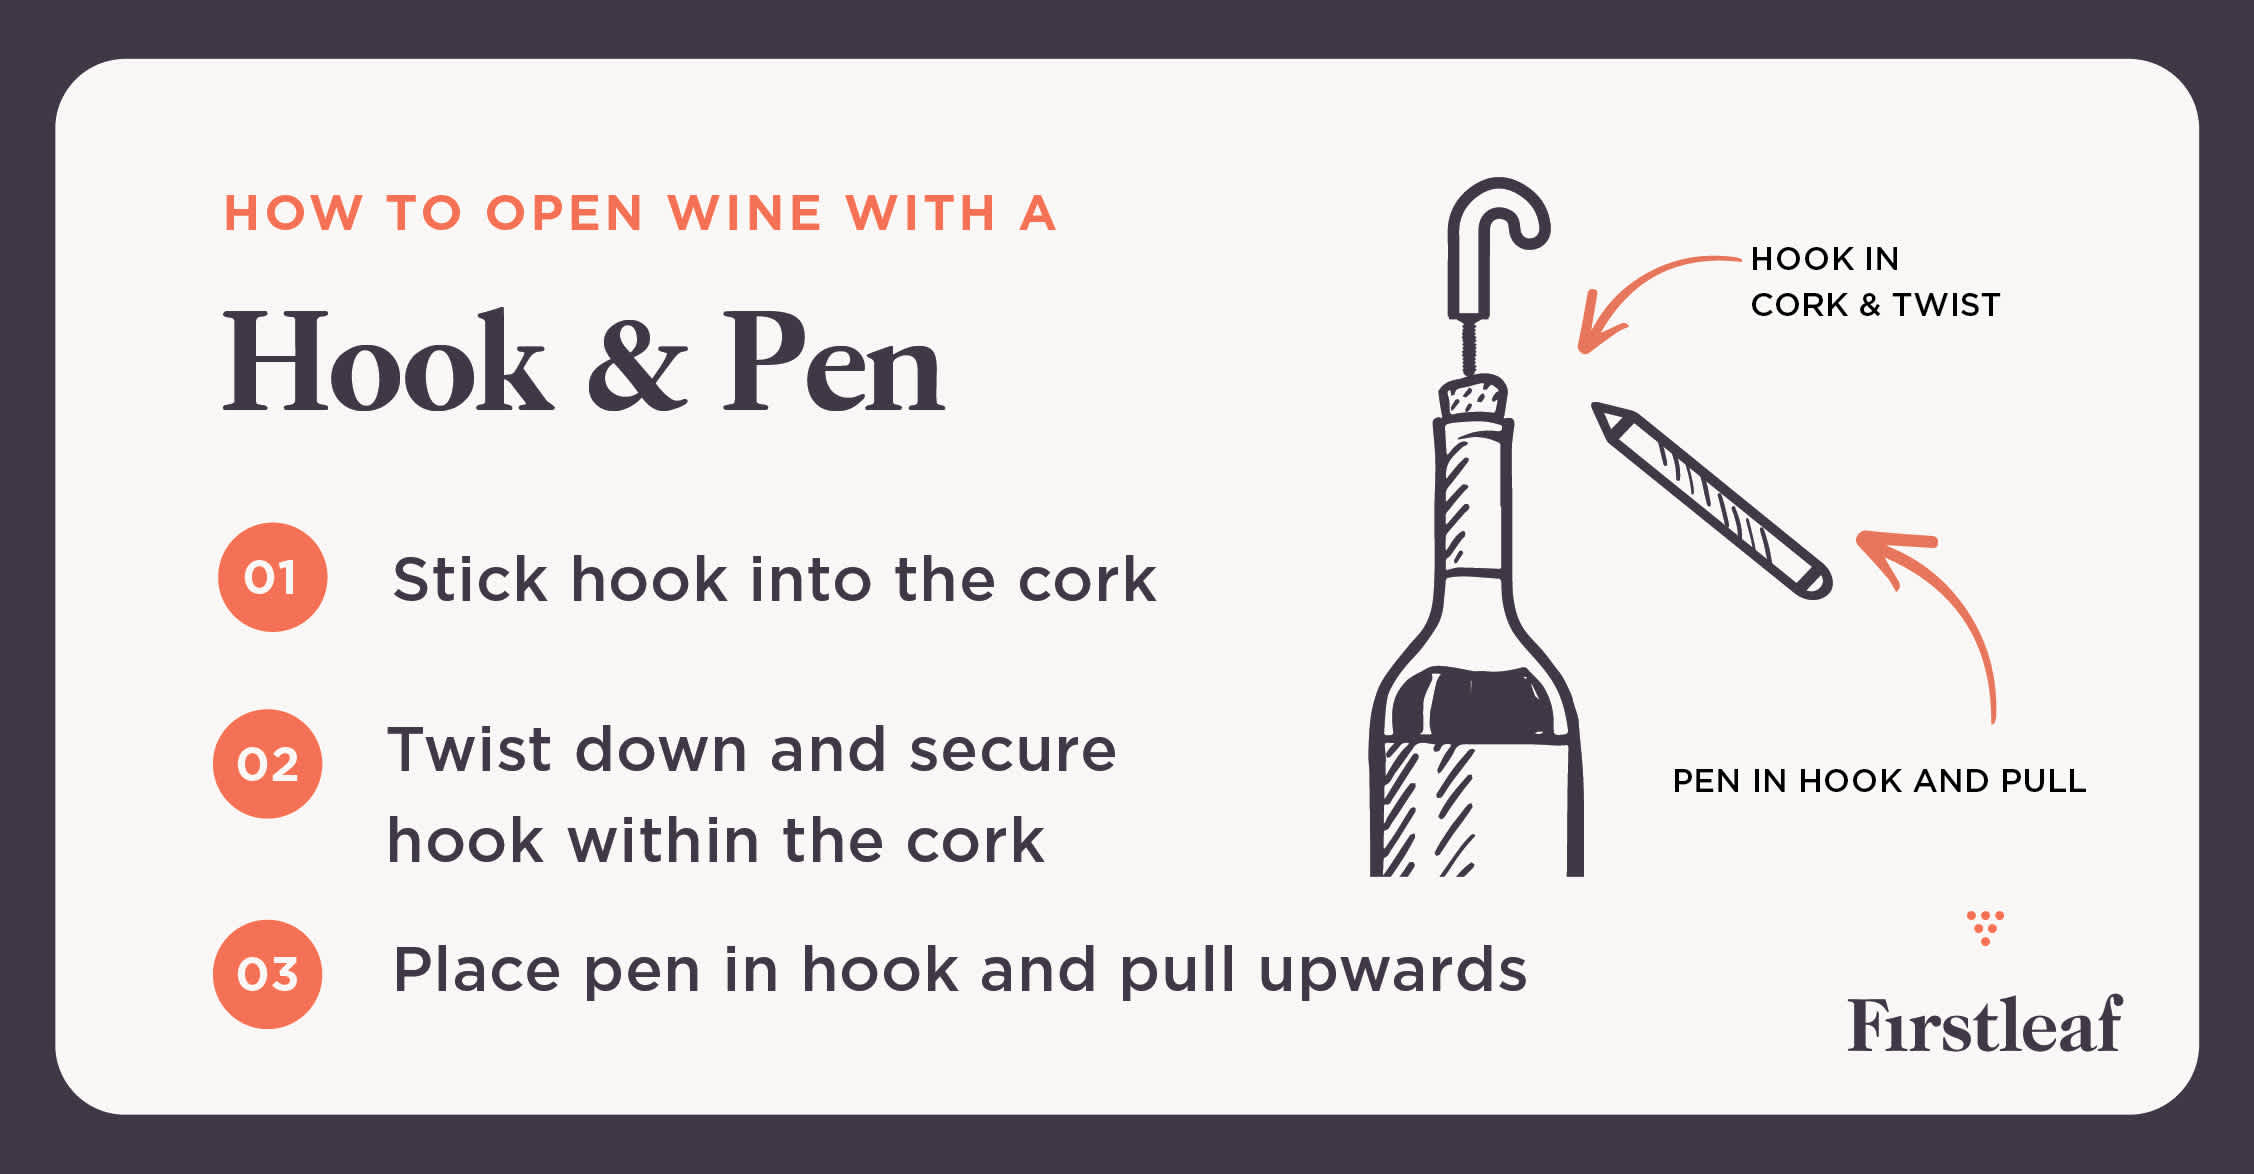 How to Open Wine with a Hook & Pen